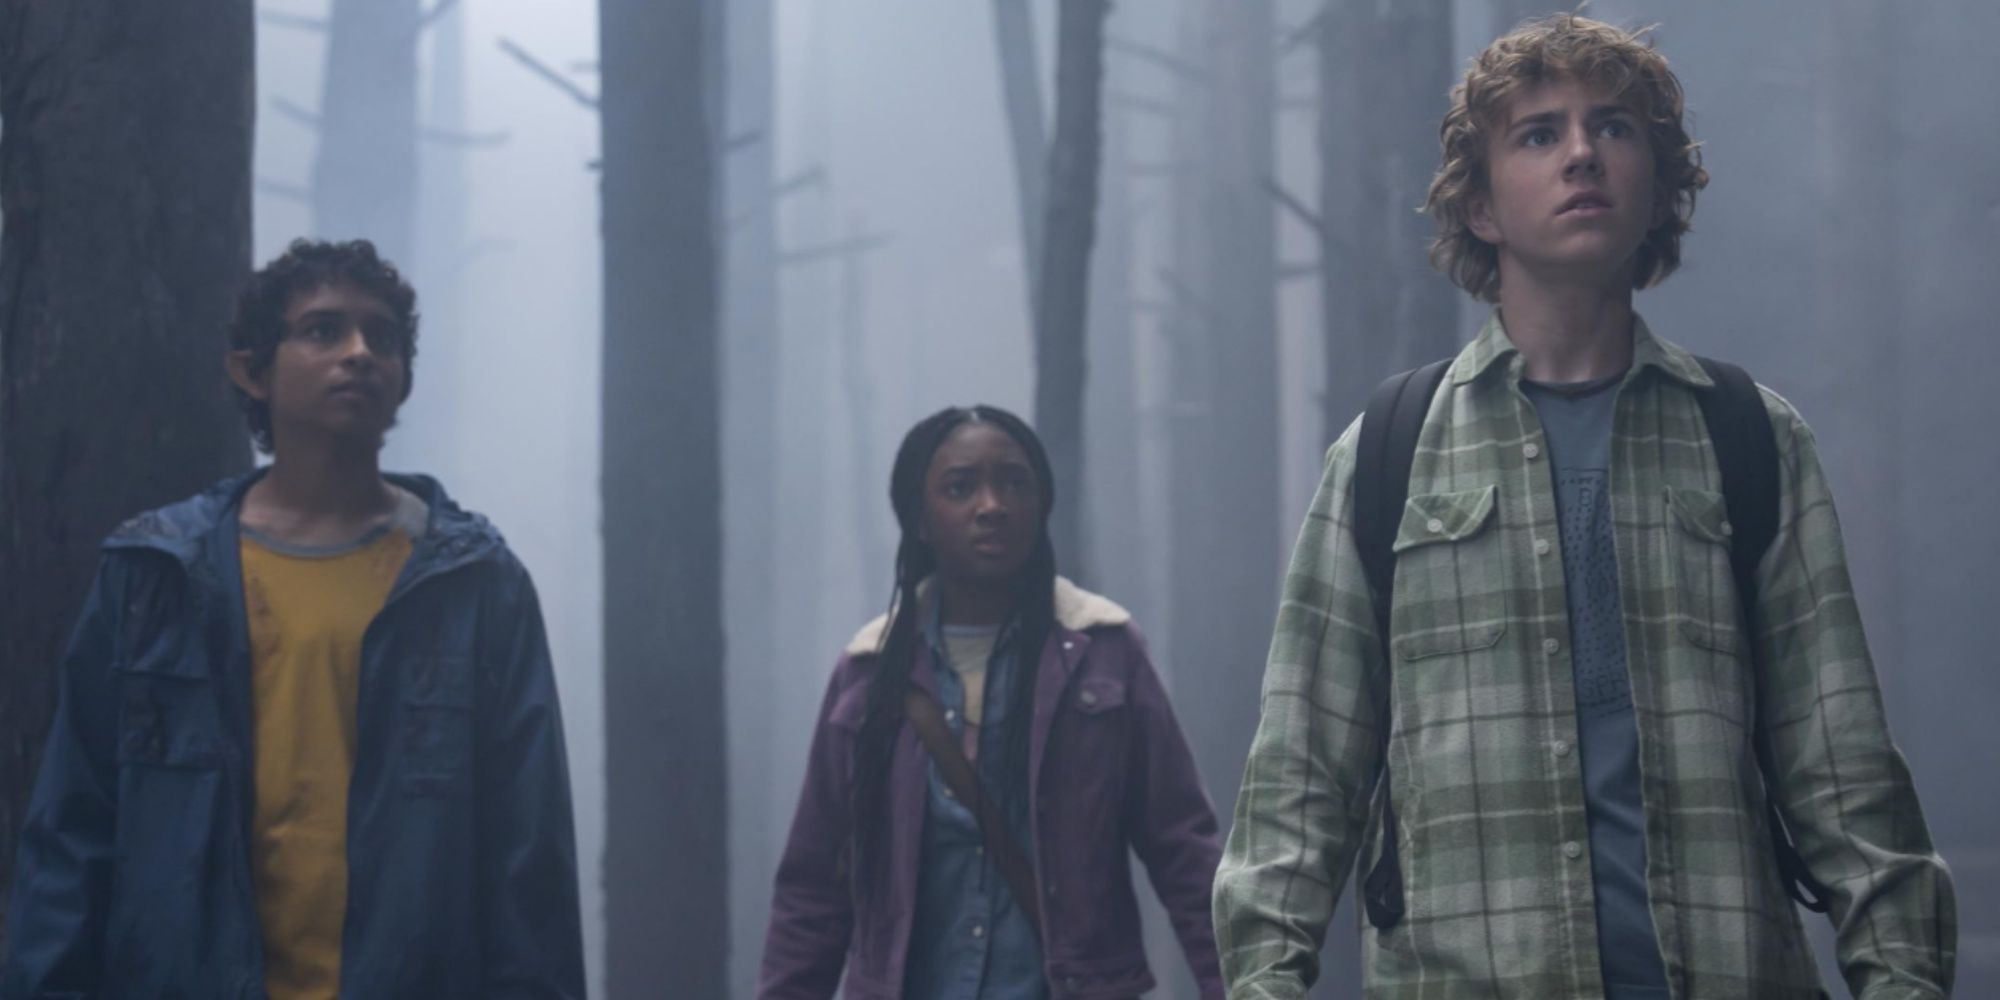 Grover. Annabeth, and Percy wandering as a group in the misty forest to Camp Half-Blood.